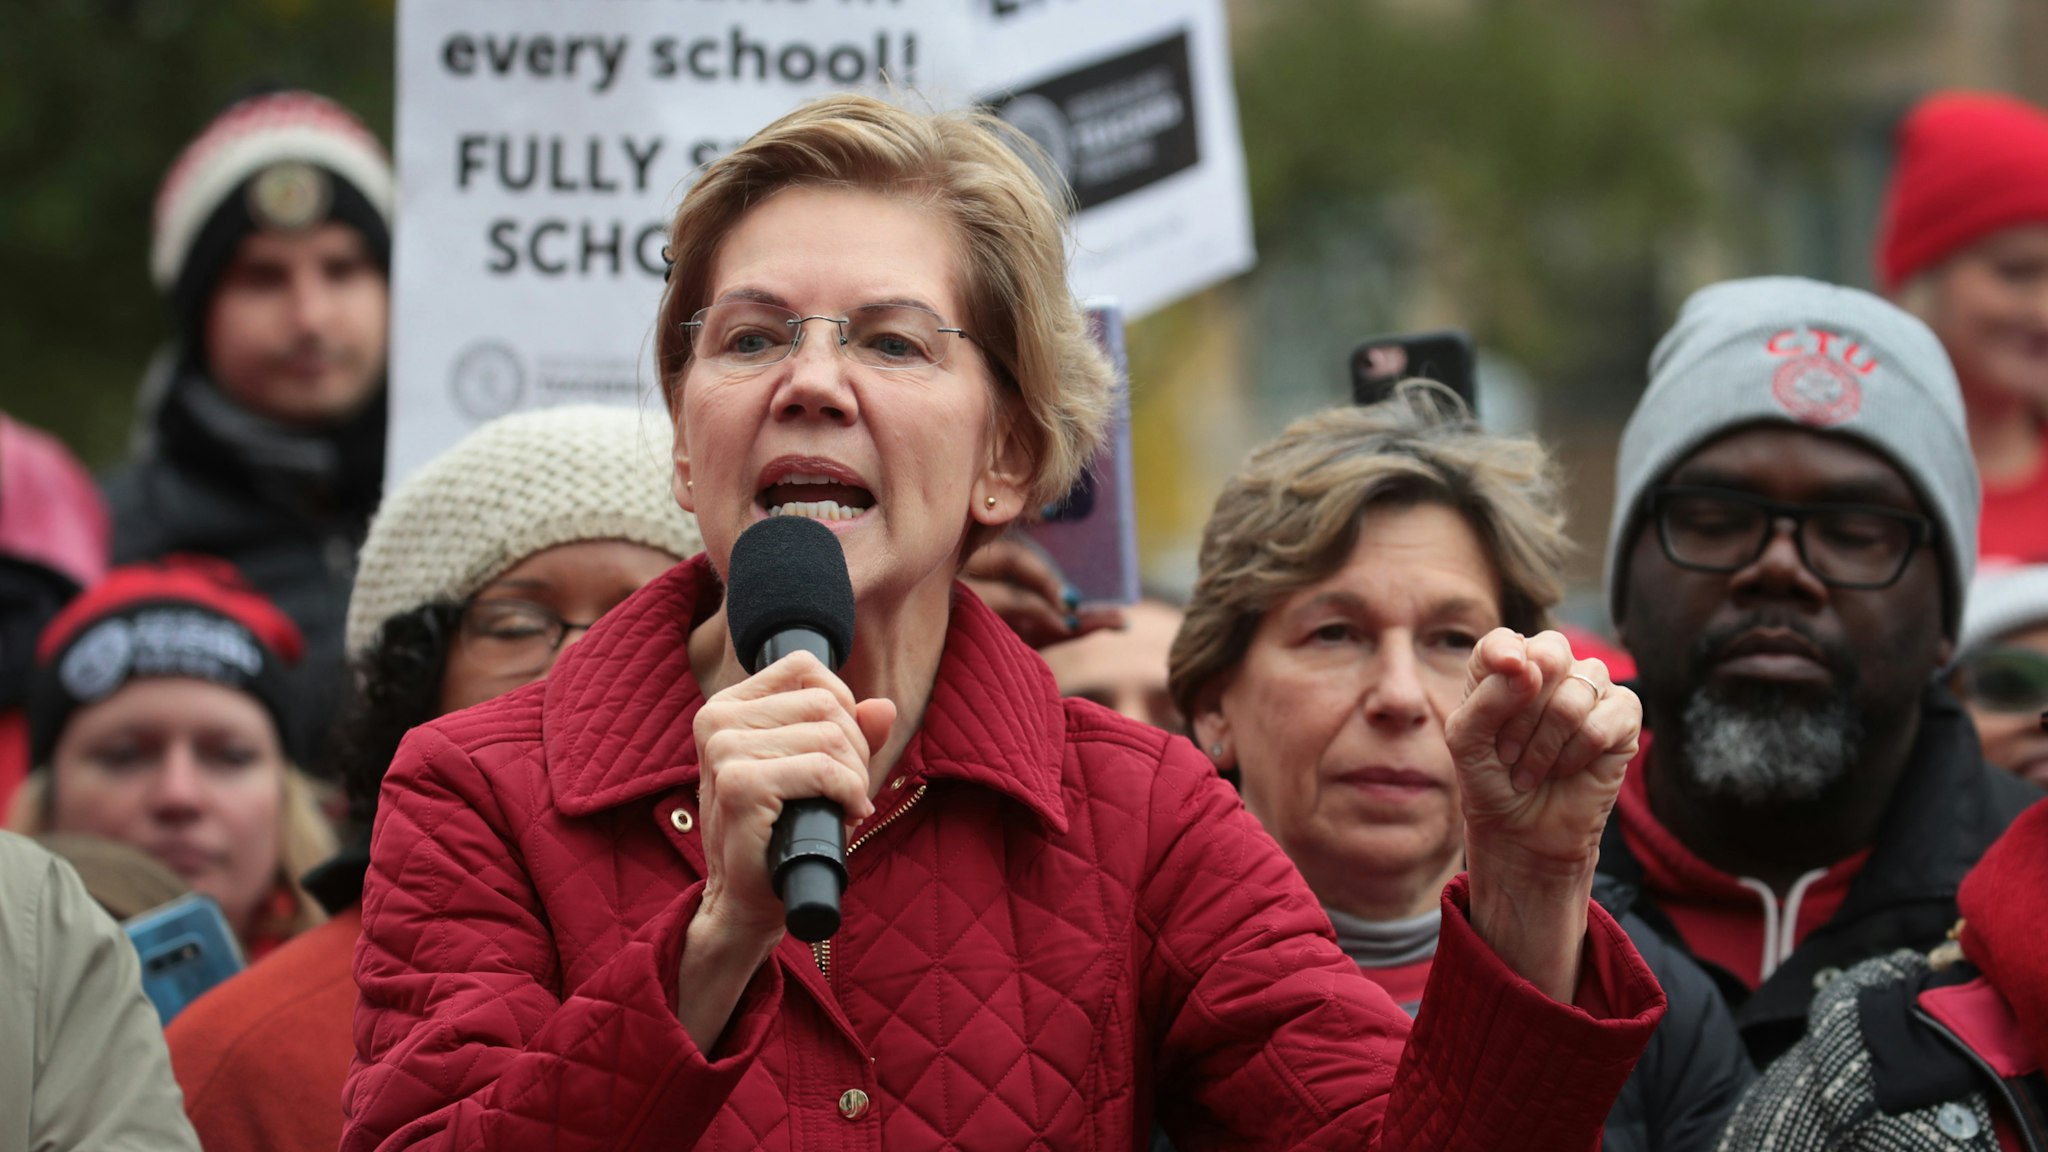 Democratic presidential candidate Sen. Elizabeth Warren (D-MA) visits with striking Chicago teachers at Oscar DePriest Elementary School on October 22, 2019 in Chicago, Illinois. About 25,000 Chicago school teachers went on strike last week after the Chicago Teachers Union (CTU) failed to reach a contract agreement with the city. With about 300,000 students, Chicago has the third largest public school system in the nation. (Photo by Scott Olson/Getty Images)